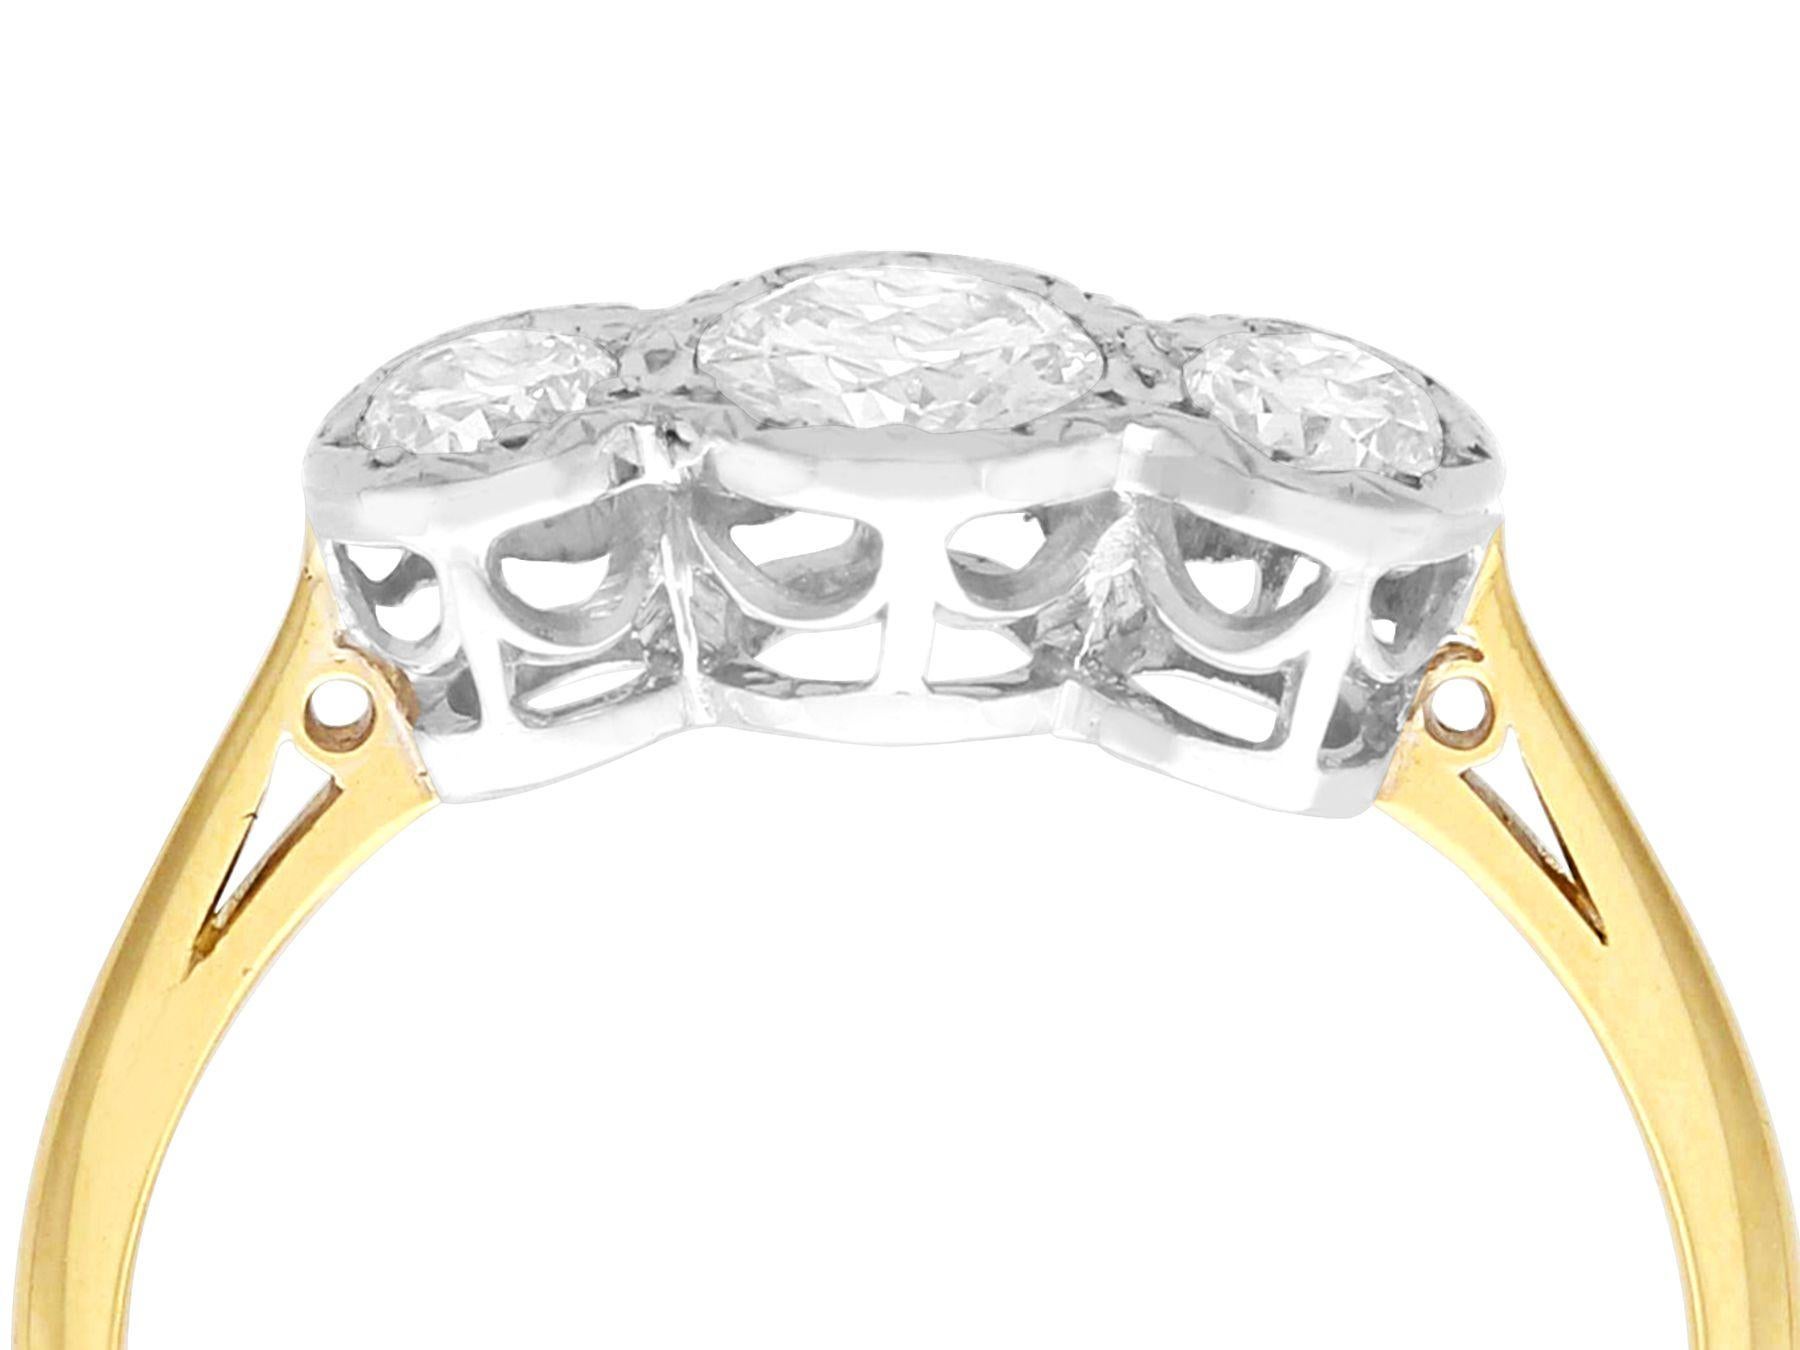 A fine and impressive antique 0.70 carat diamond and 18 karat yellow gold, platinum set trilogy ring; part of our diverse antique jewelry collections

This fine and impressive antique three stone ring has been crafted in 18k yellow gold with a